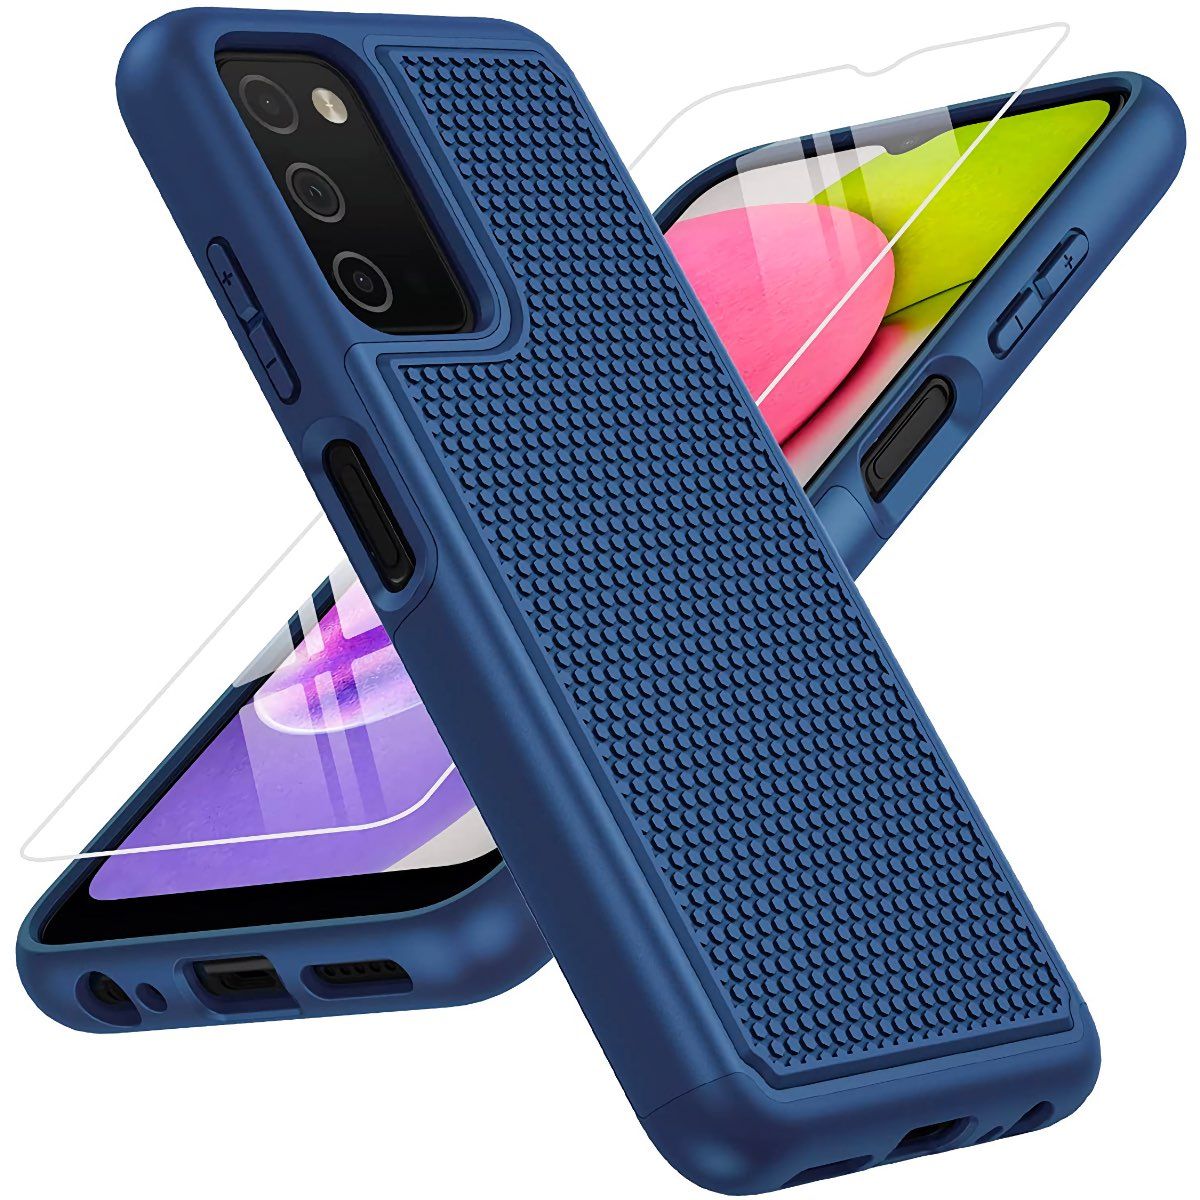 Bniut Shockproof Case for Galaxy A03s